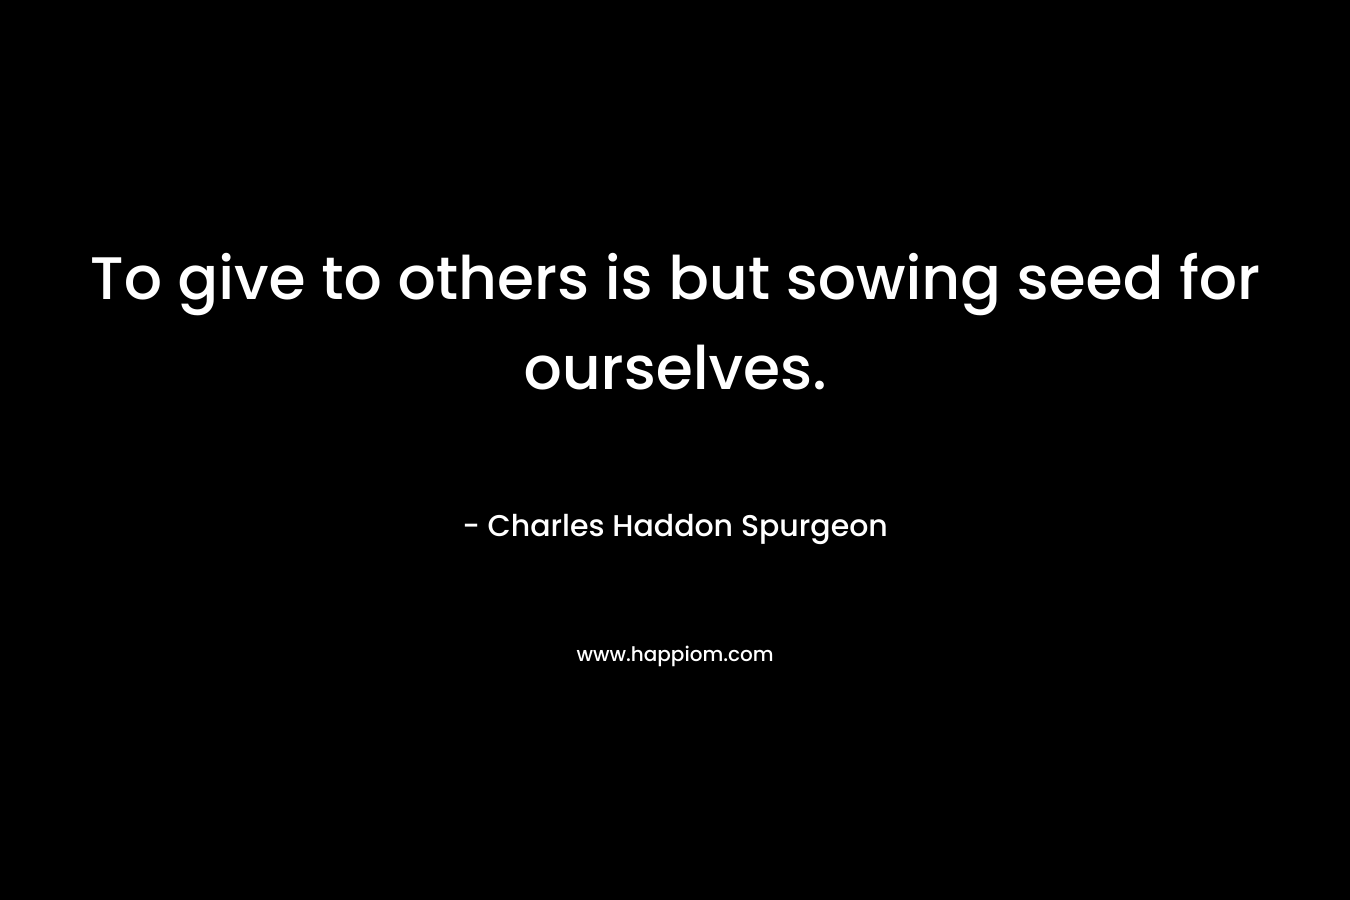 To give to others is but sowing seed for ourselves. – Charles Haddon Spurgeon